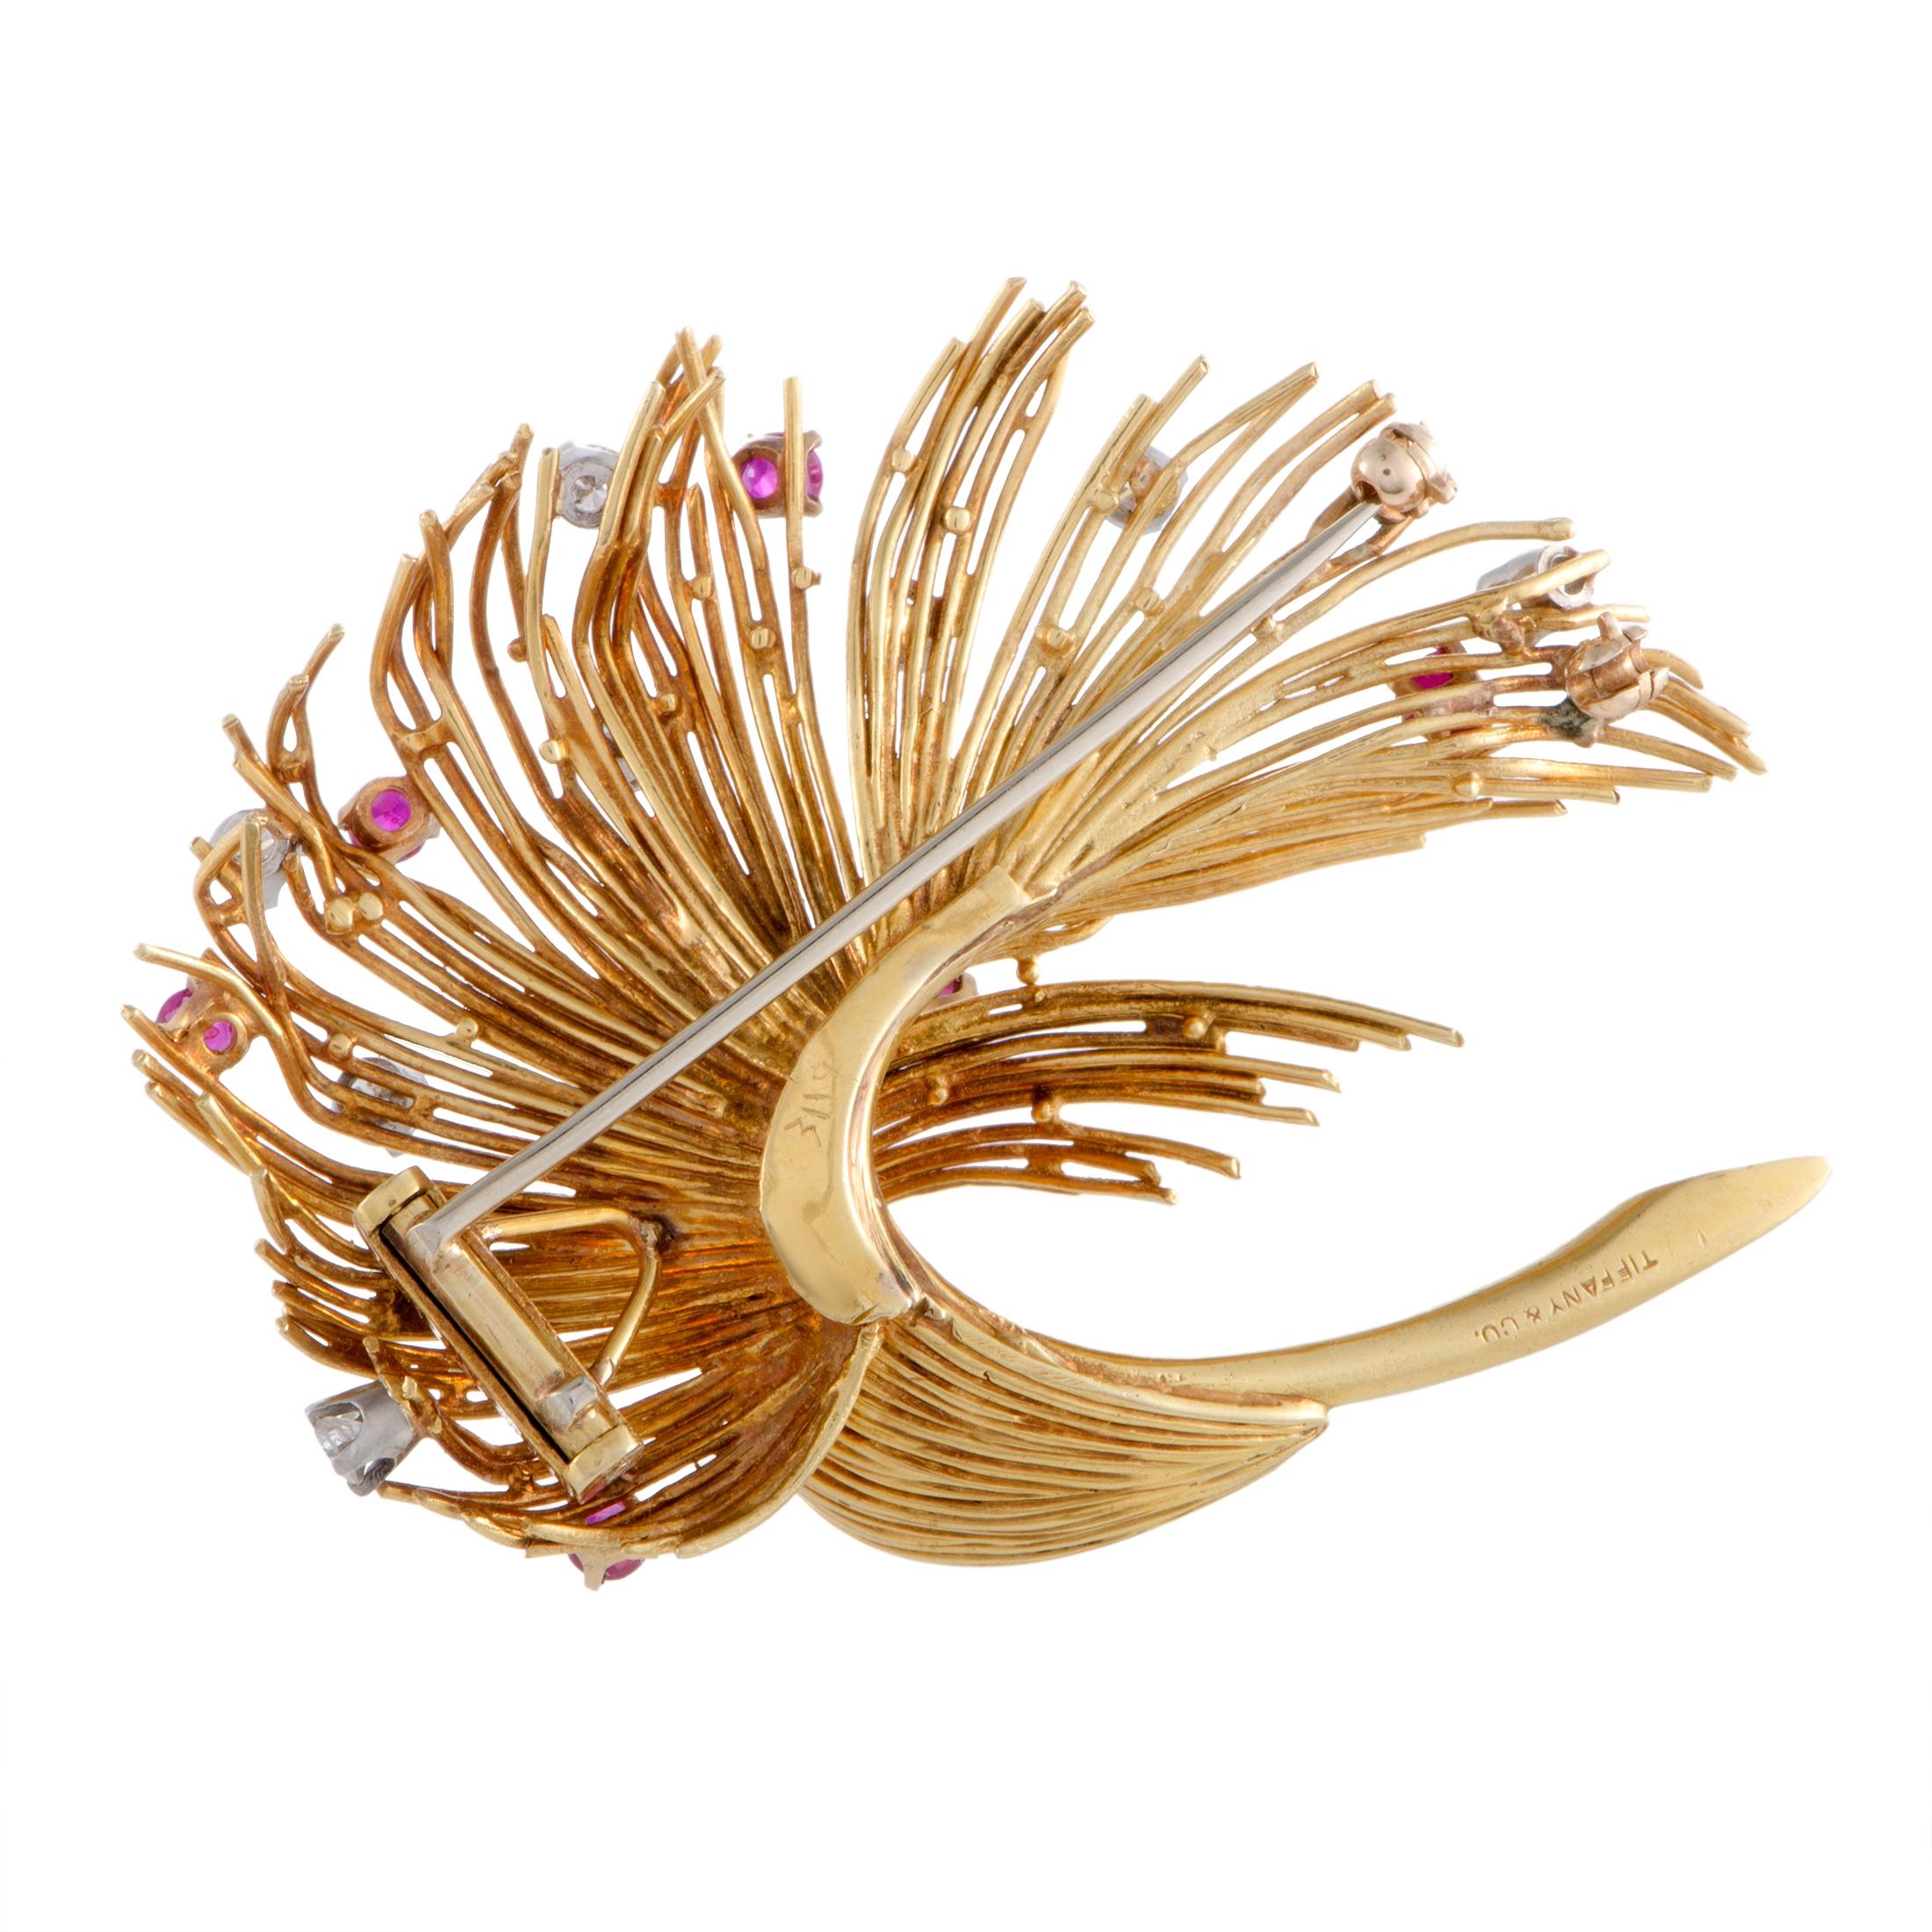 With its incredibly fashionable design that is beautifully topped off with dazzling diamonds and striking rubies, this extraordinary brooch from Tiffany & Co. will attractively accentuate any ensemble of yours. The brooch is made of radiant 18K